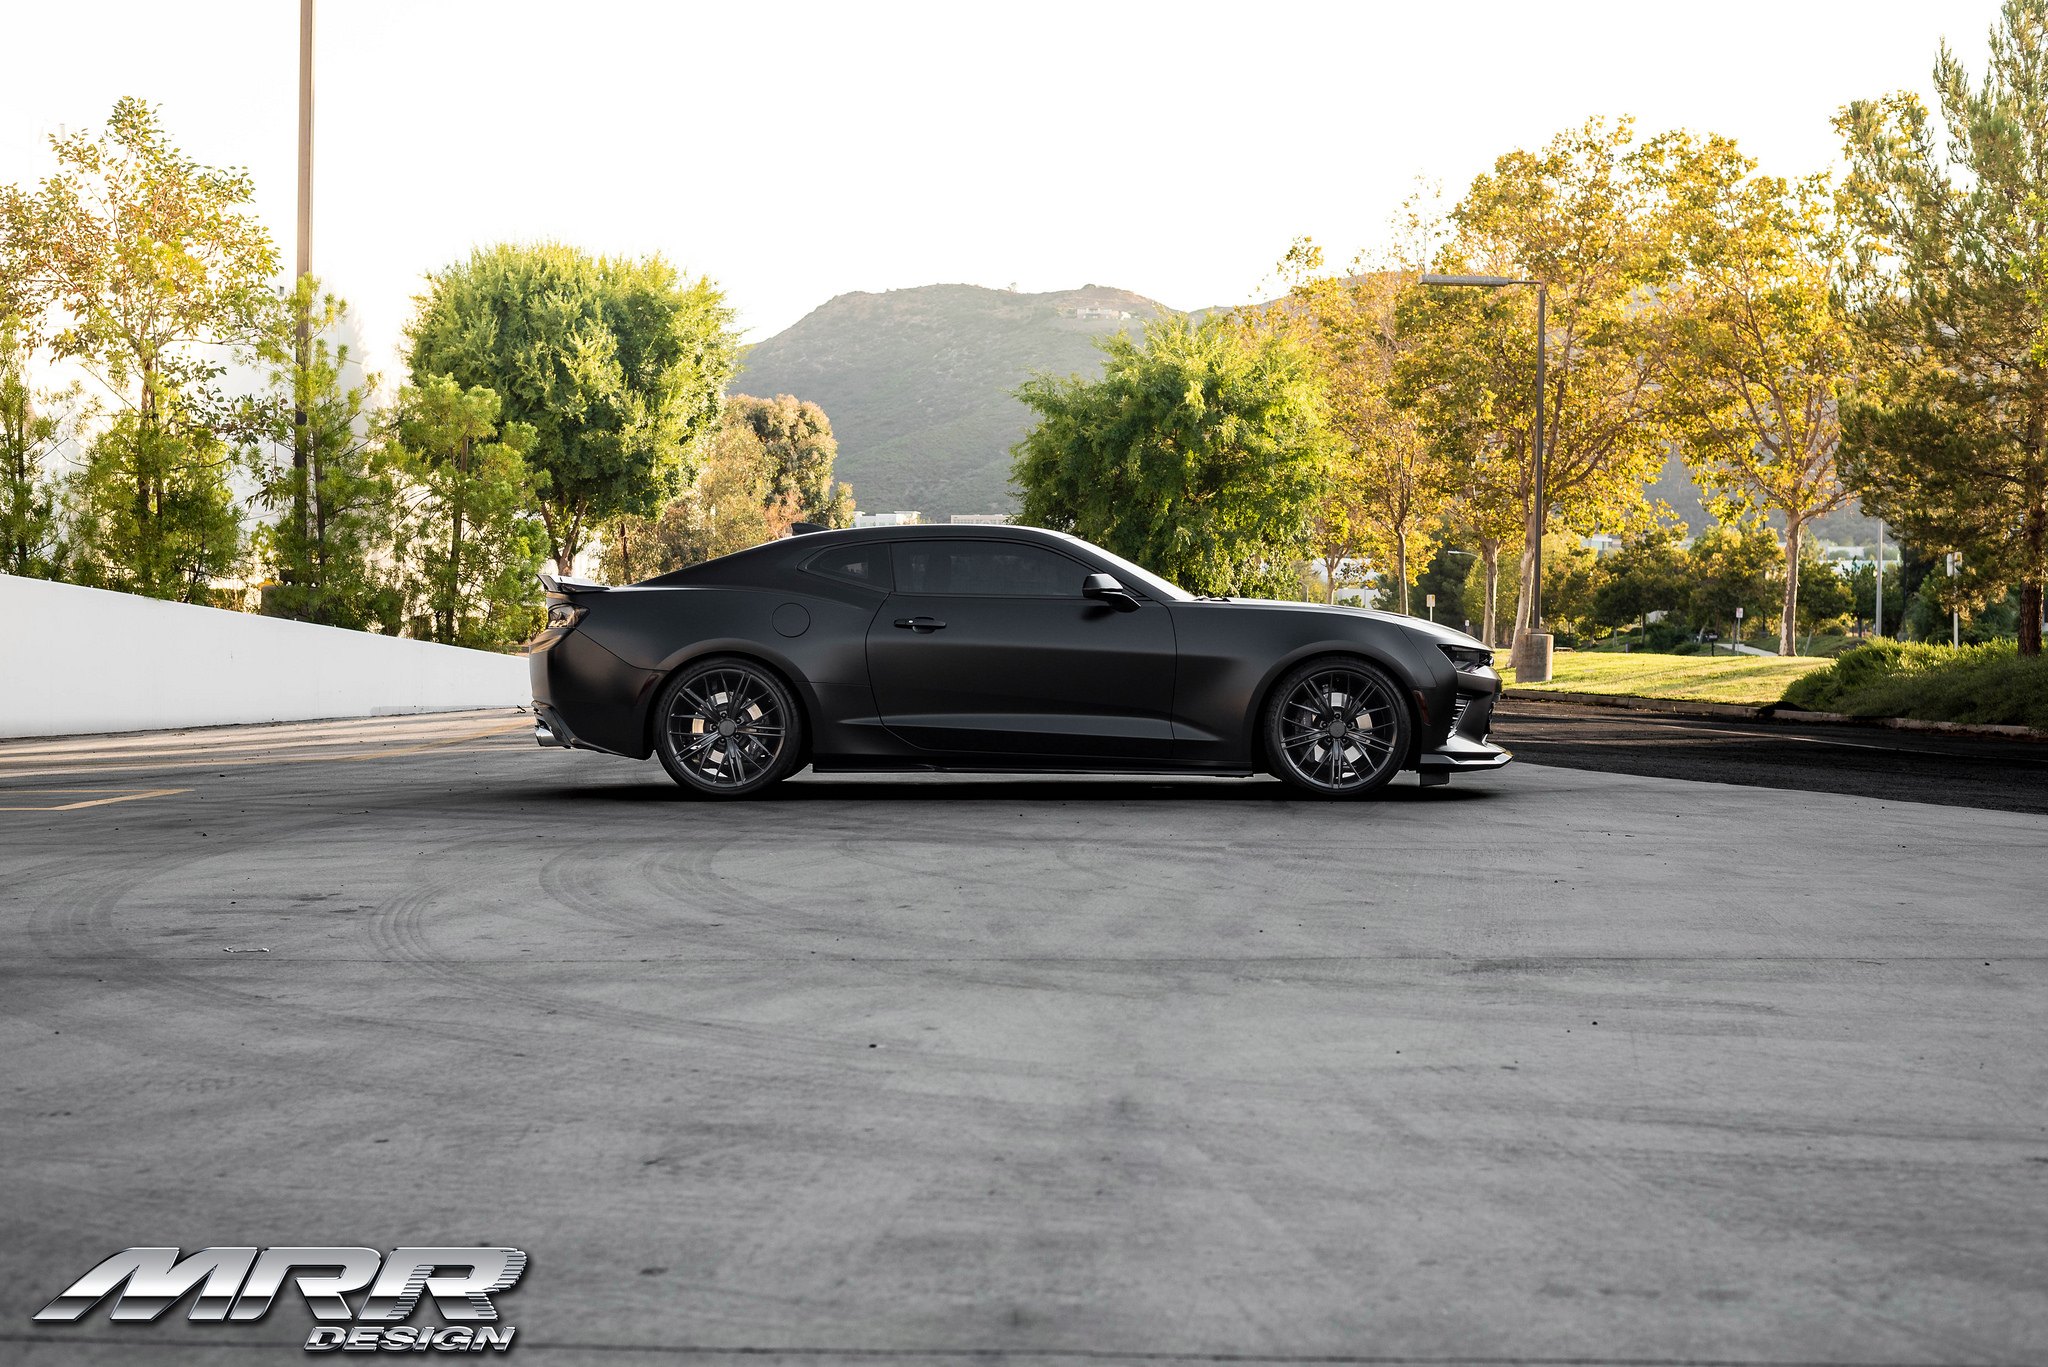 Aftermarket Side Skirts on Black Chevy Camaro - Photo by MRR